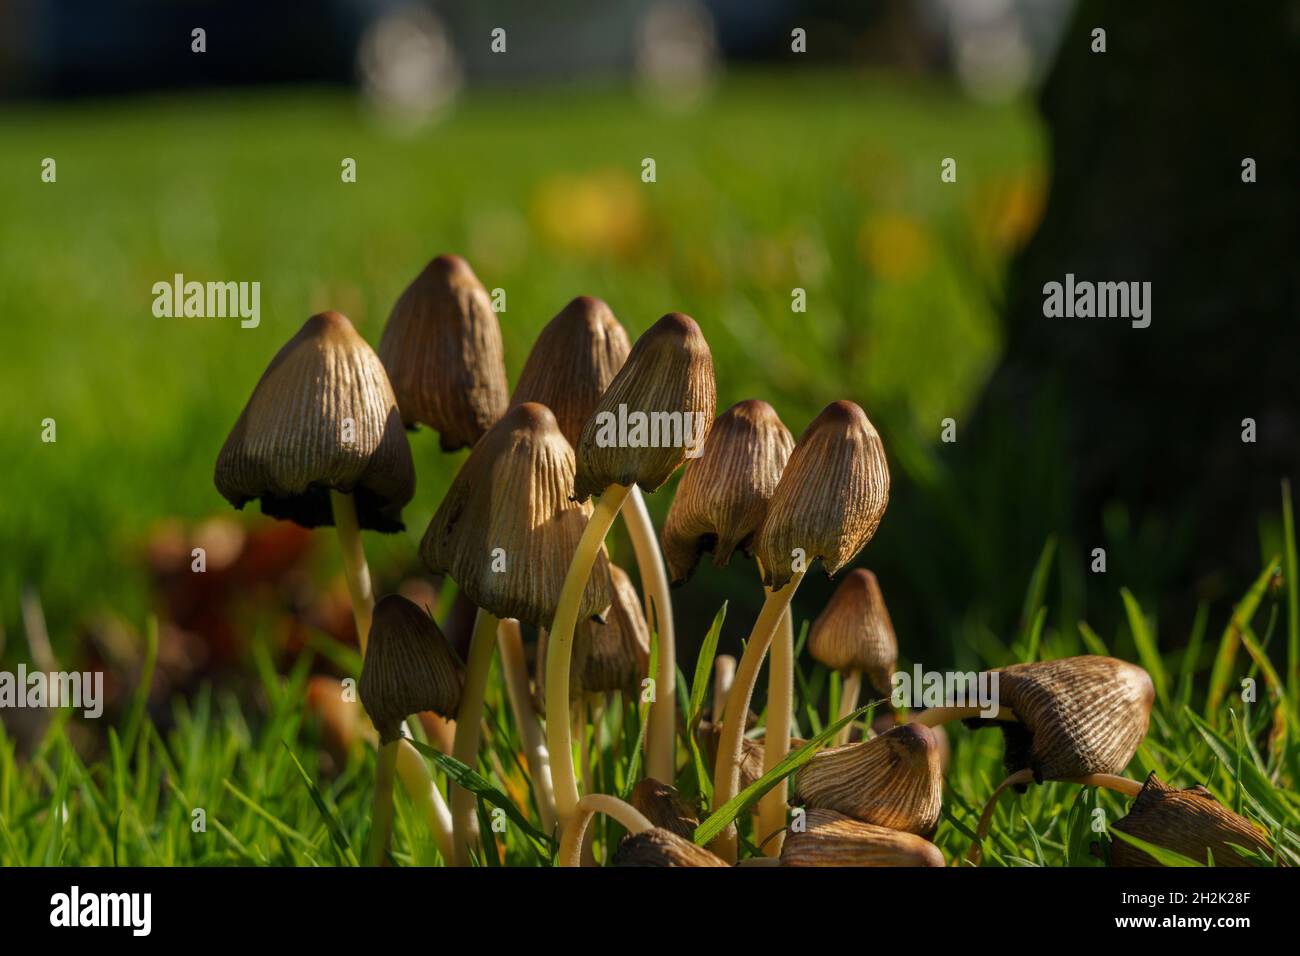 This close-up shows a group of long-stemmed, light-brown striped fungi growing on the ground. Stock Photo